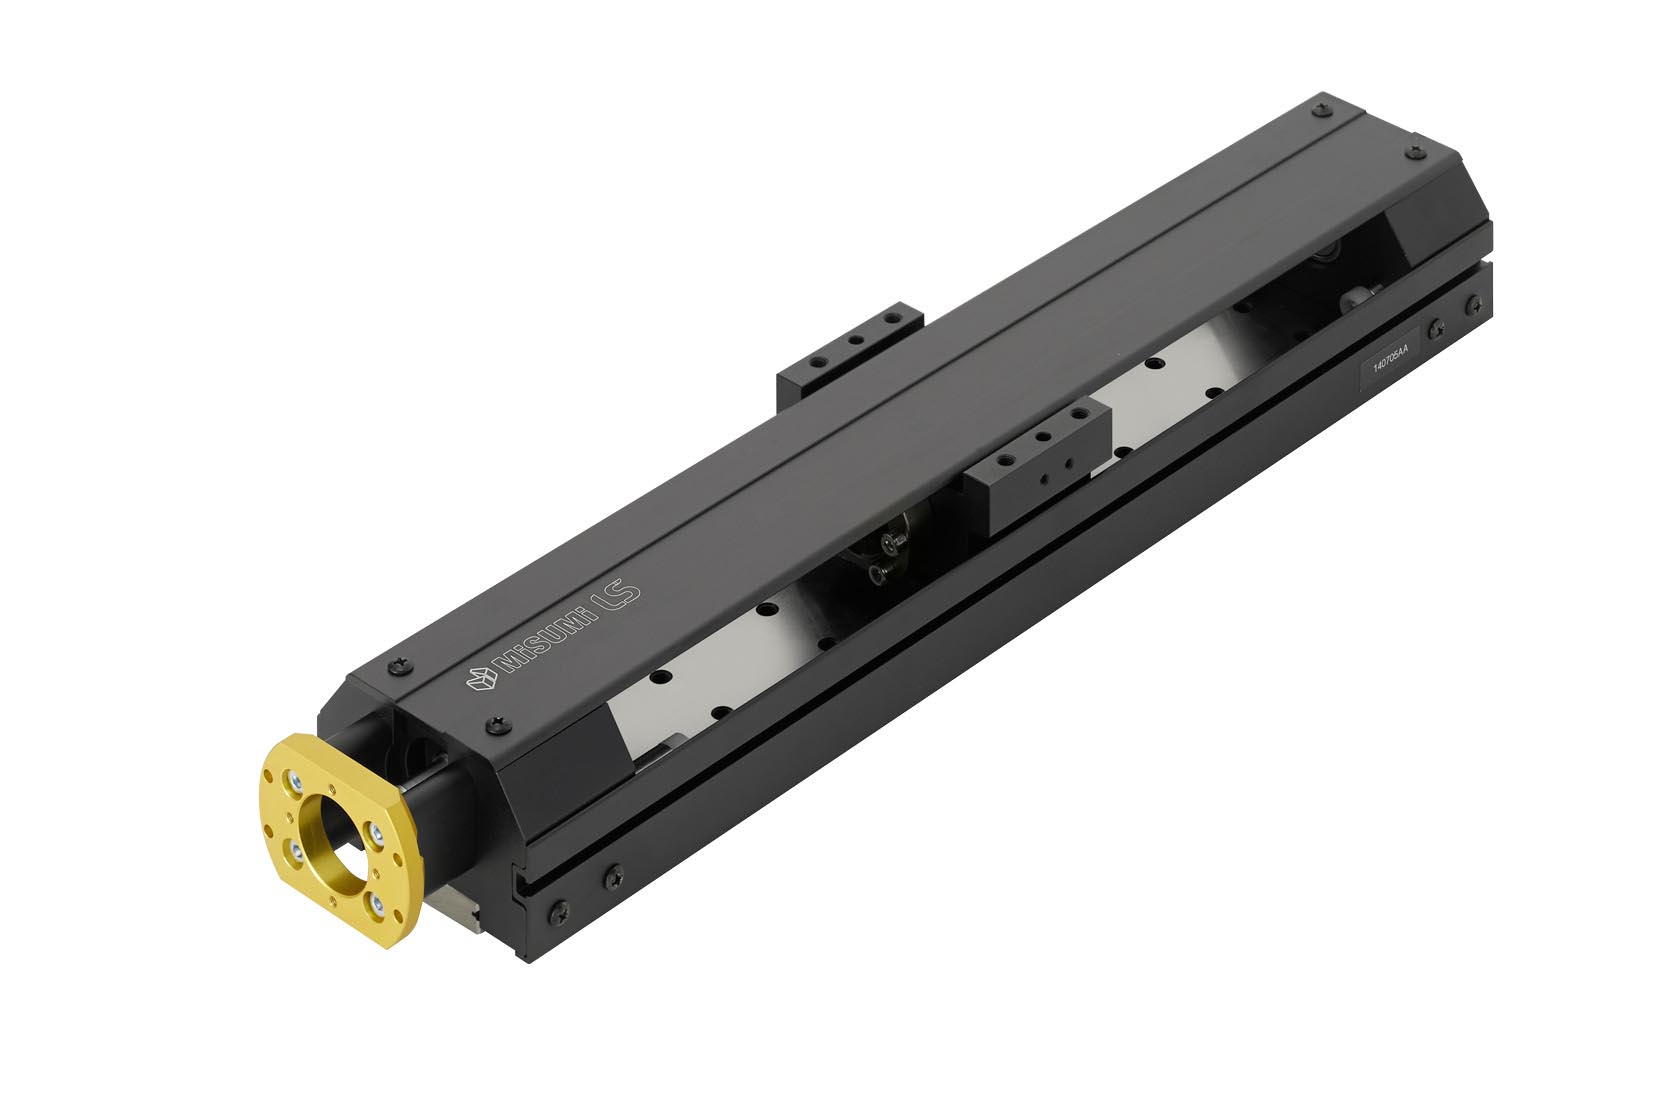 Single Axis Actuators - LS12 Series, Driven by Ball Screw.